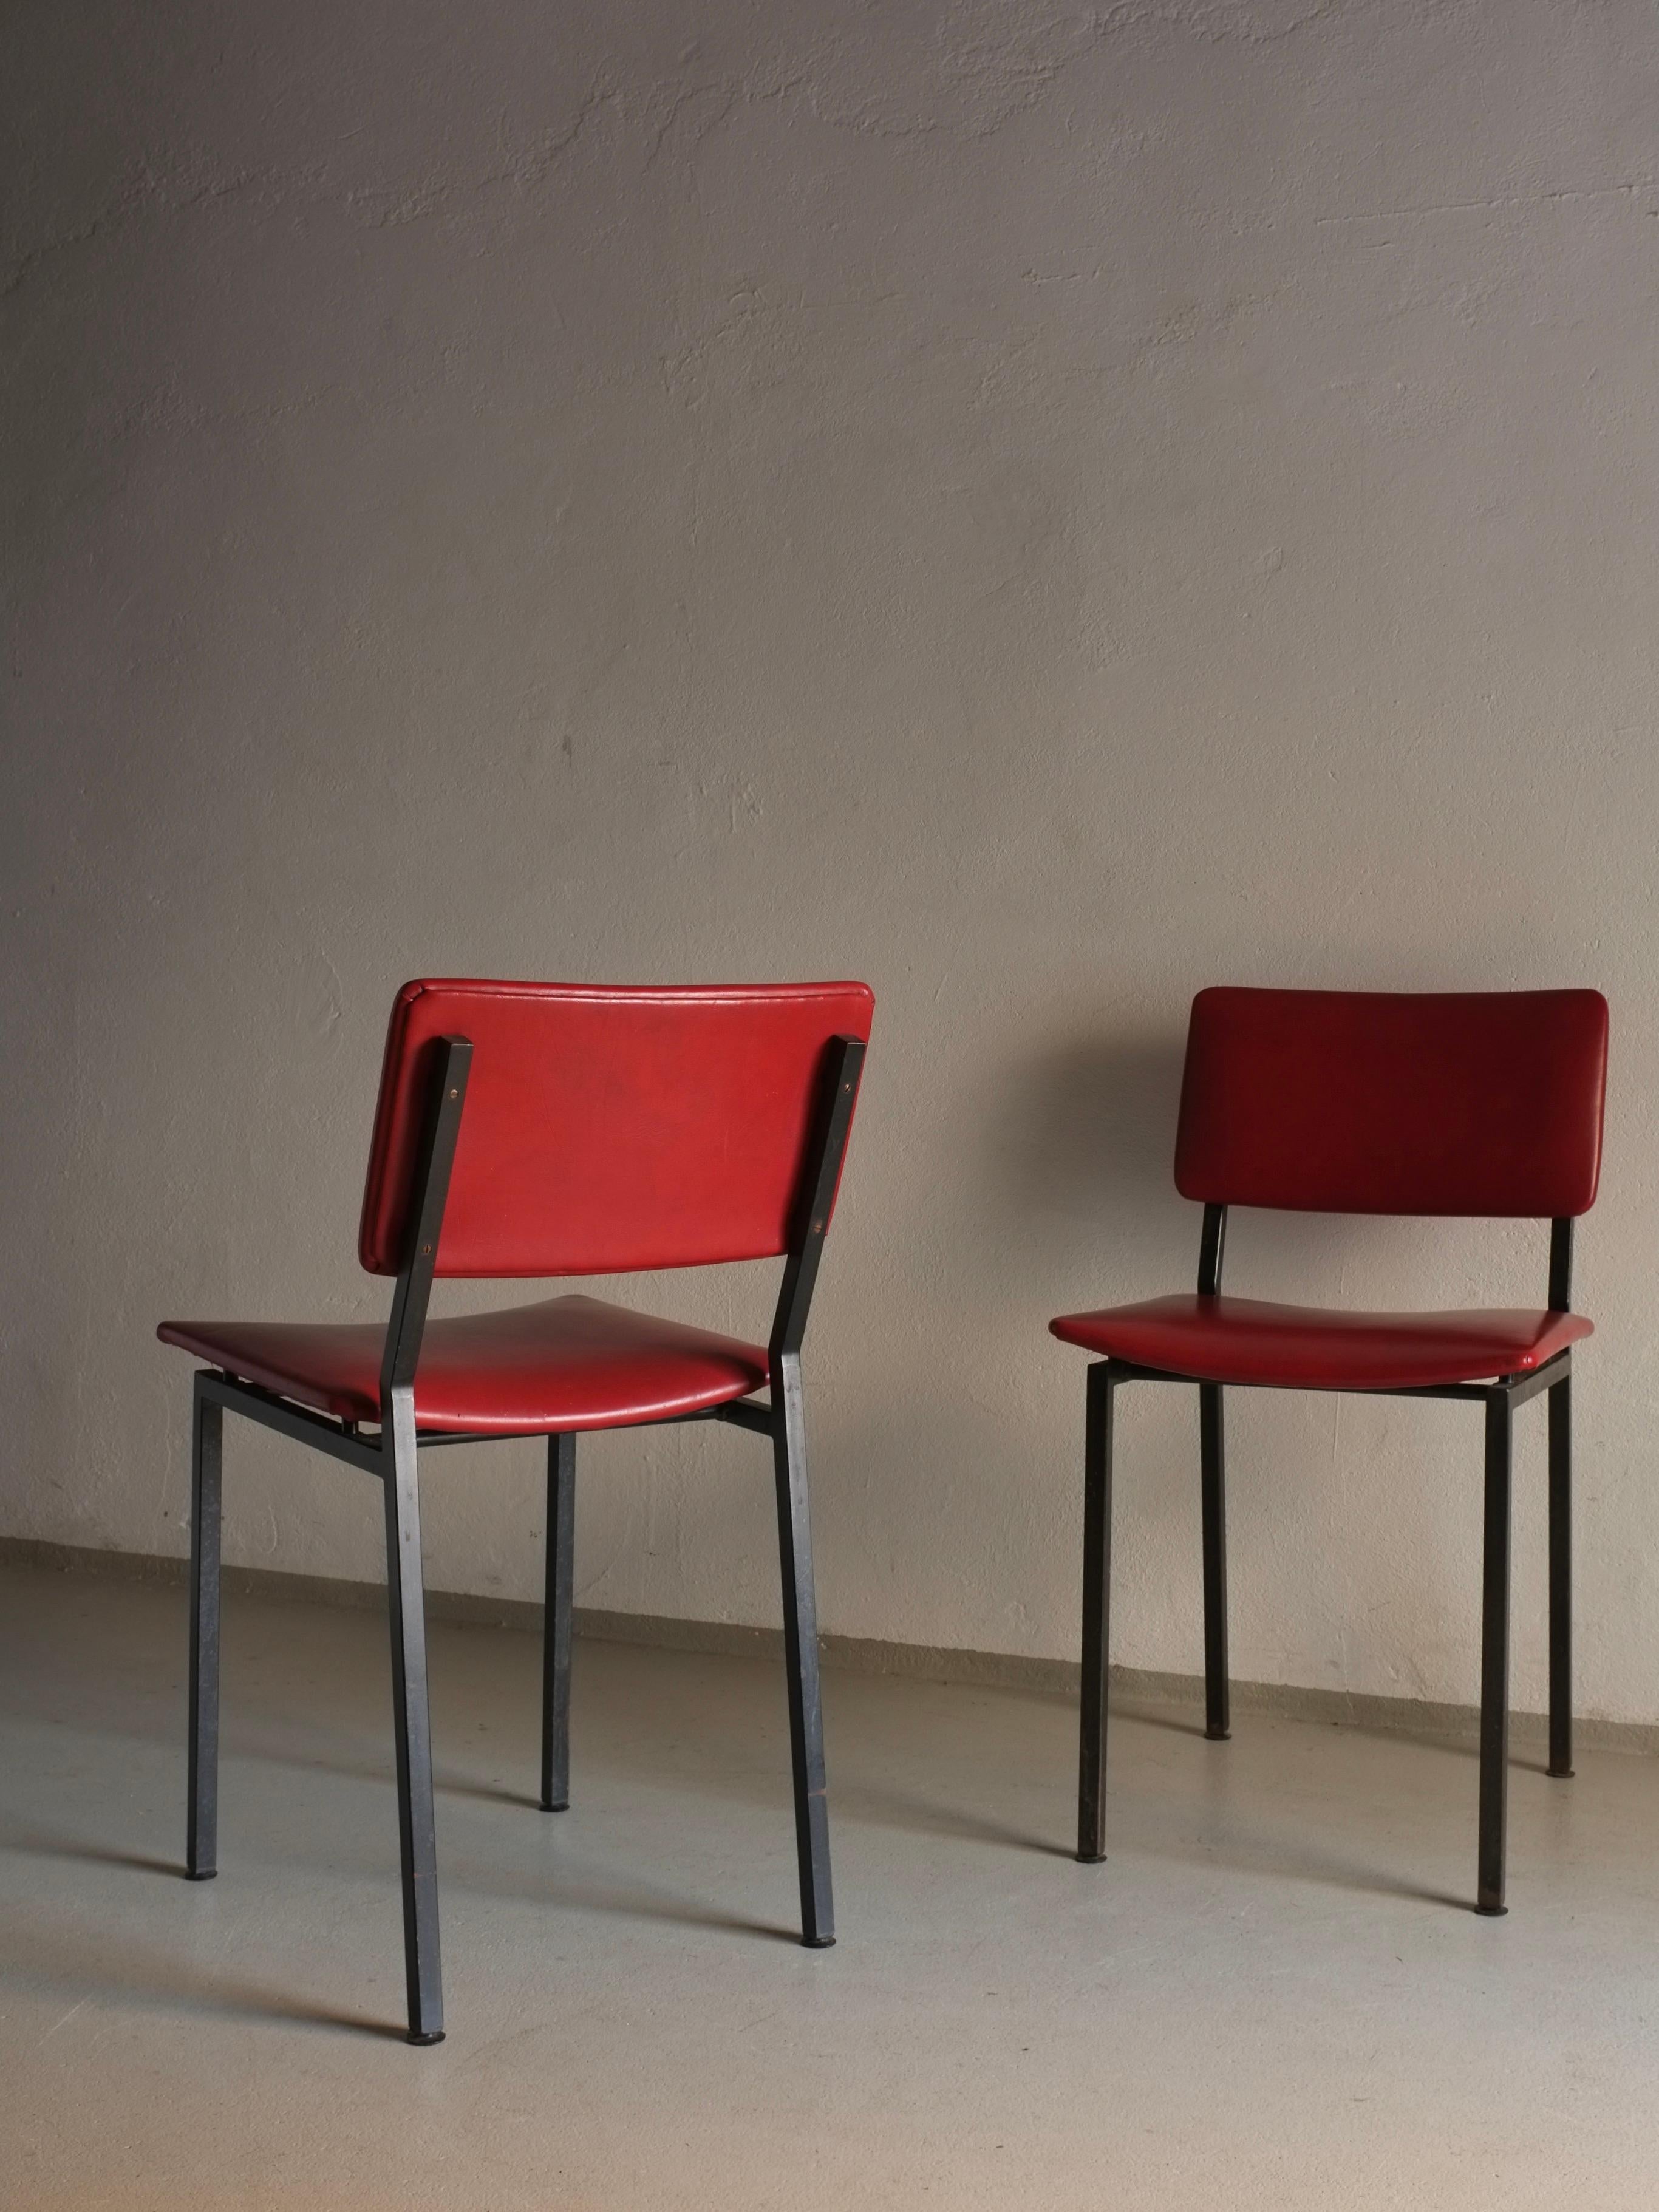 Set of 2 Black Metal Chairs by Gerrit Veenendaal For Kembo, Netherlands 1960s For Sale 3